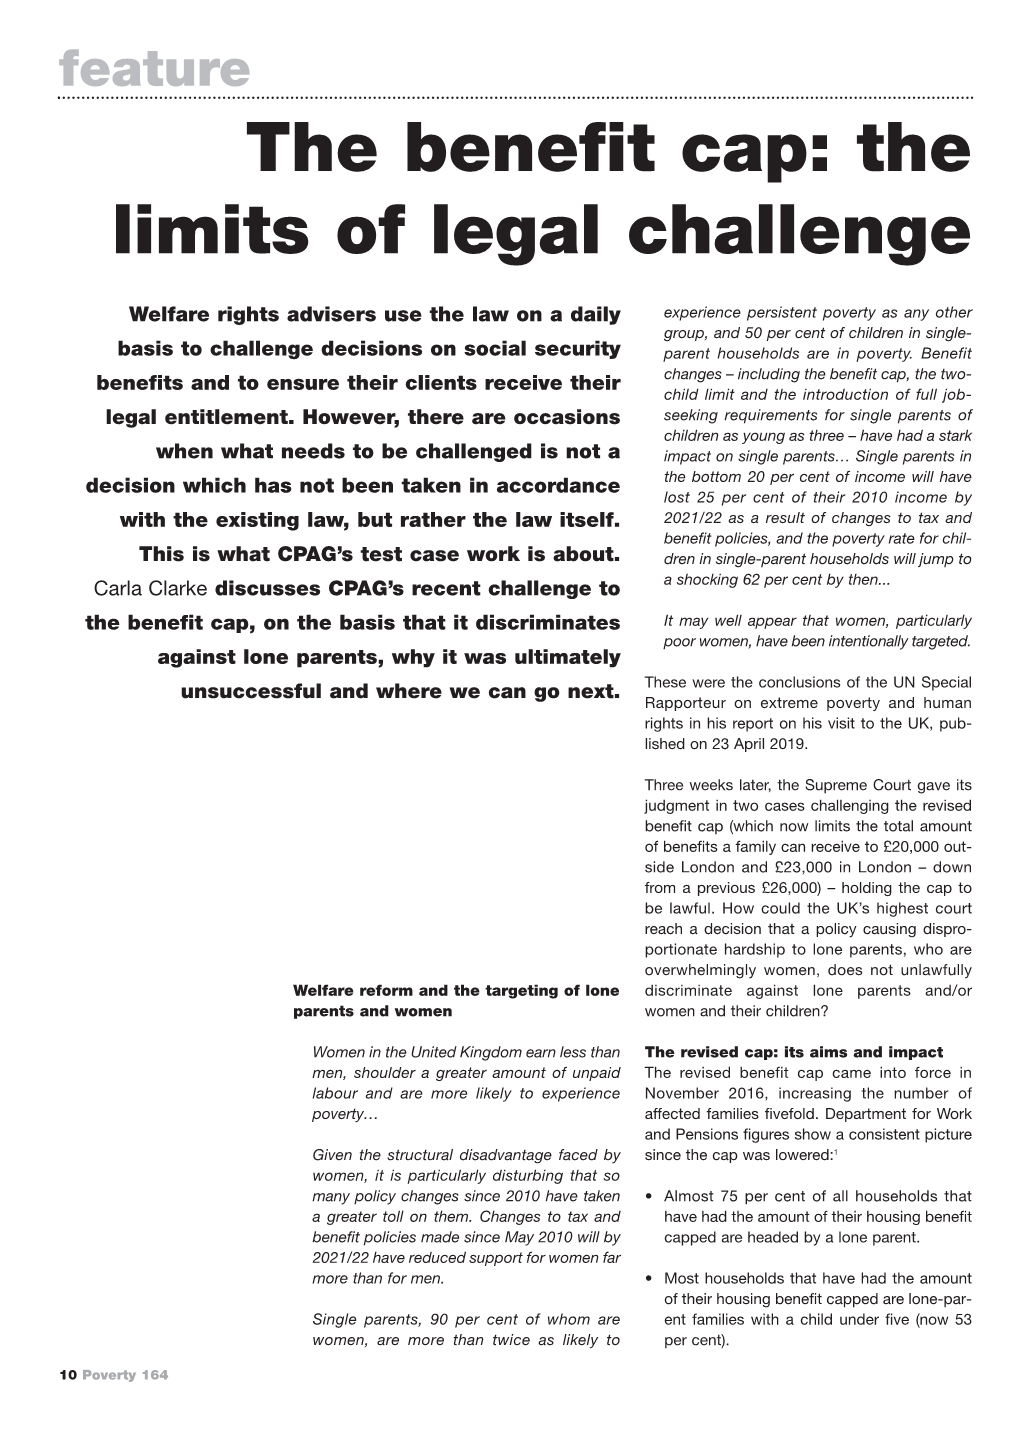 The Benefit Cap: the Limits of Legal Challenge